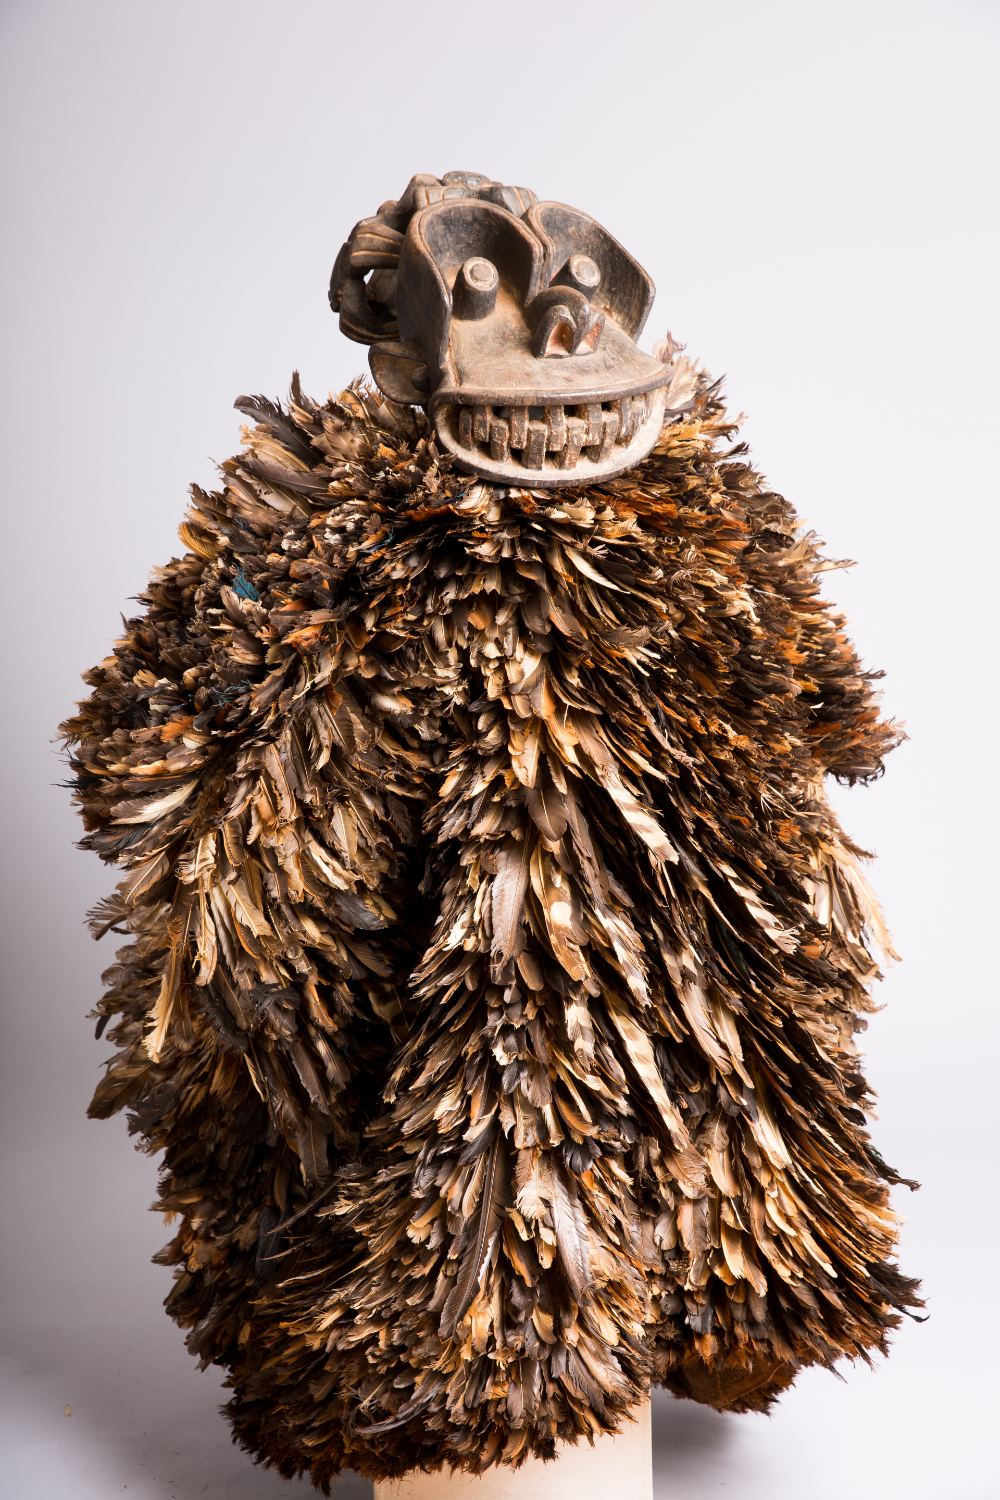 thumbnail of Ceremonial Costume with Mask from Northwestern Grassfields: Kom. medium: Wood, feathers, burlap sack, pigment. date: 19th century